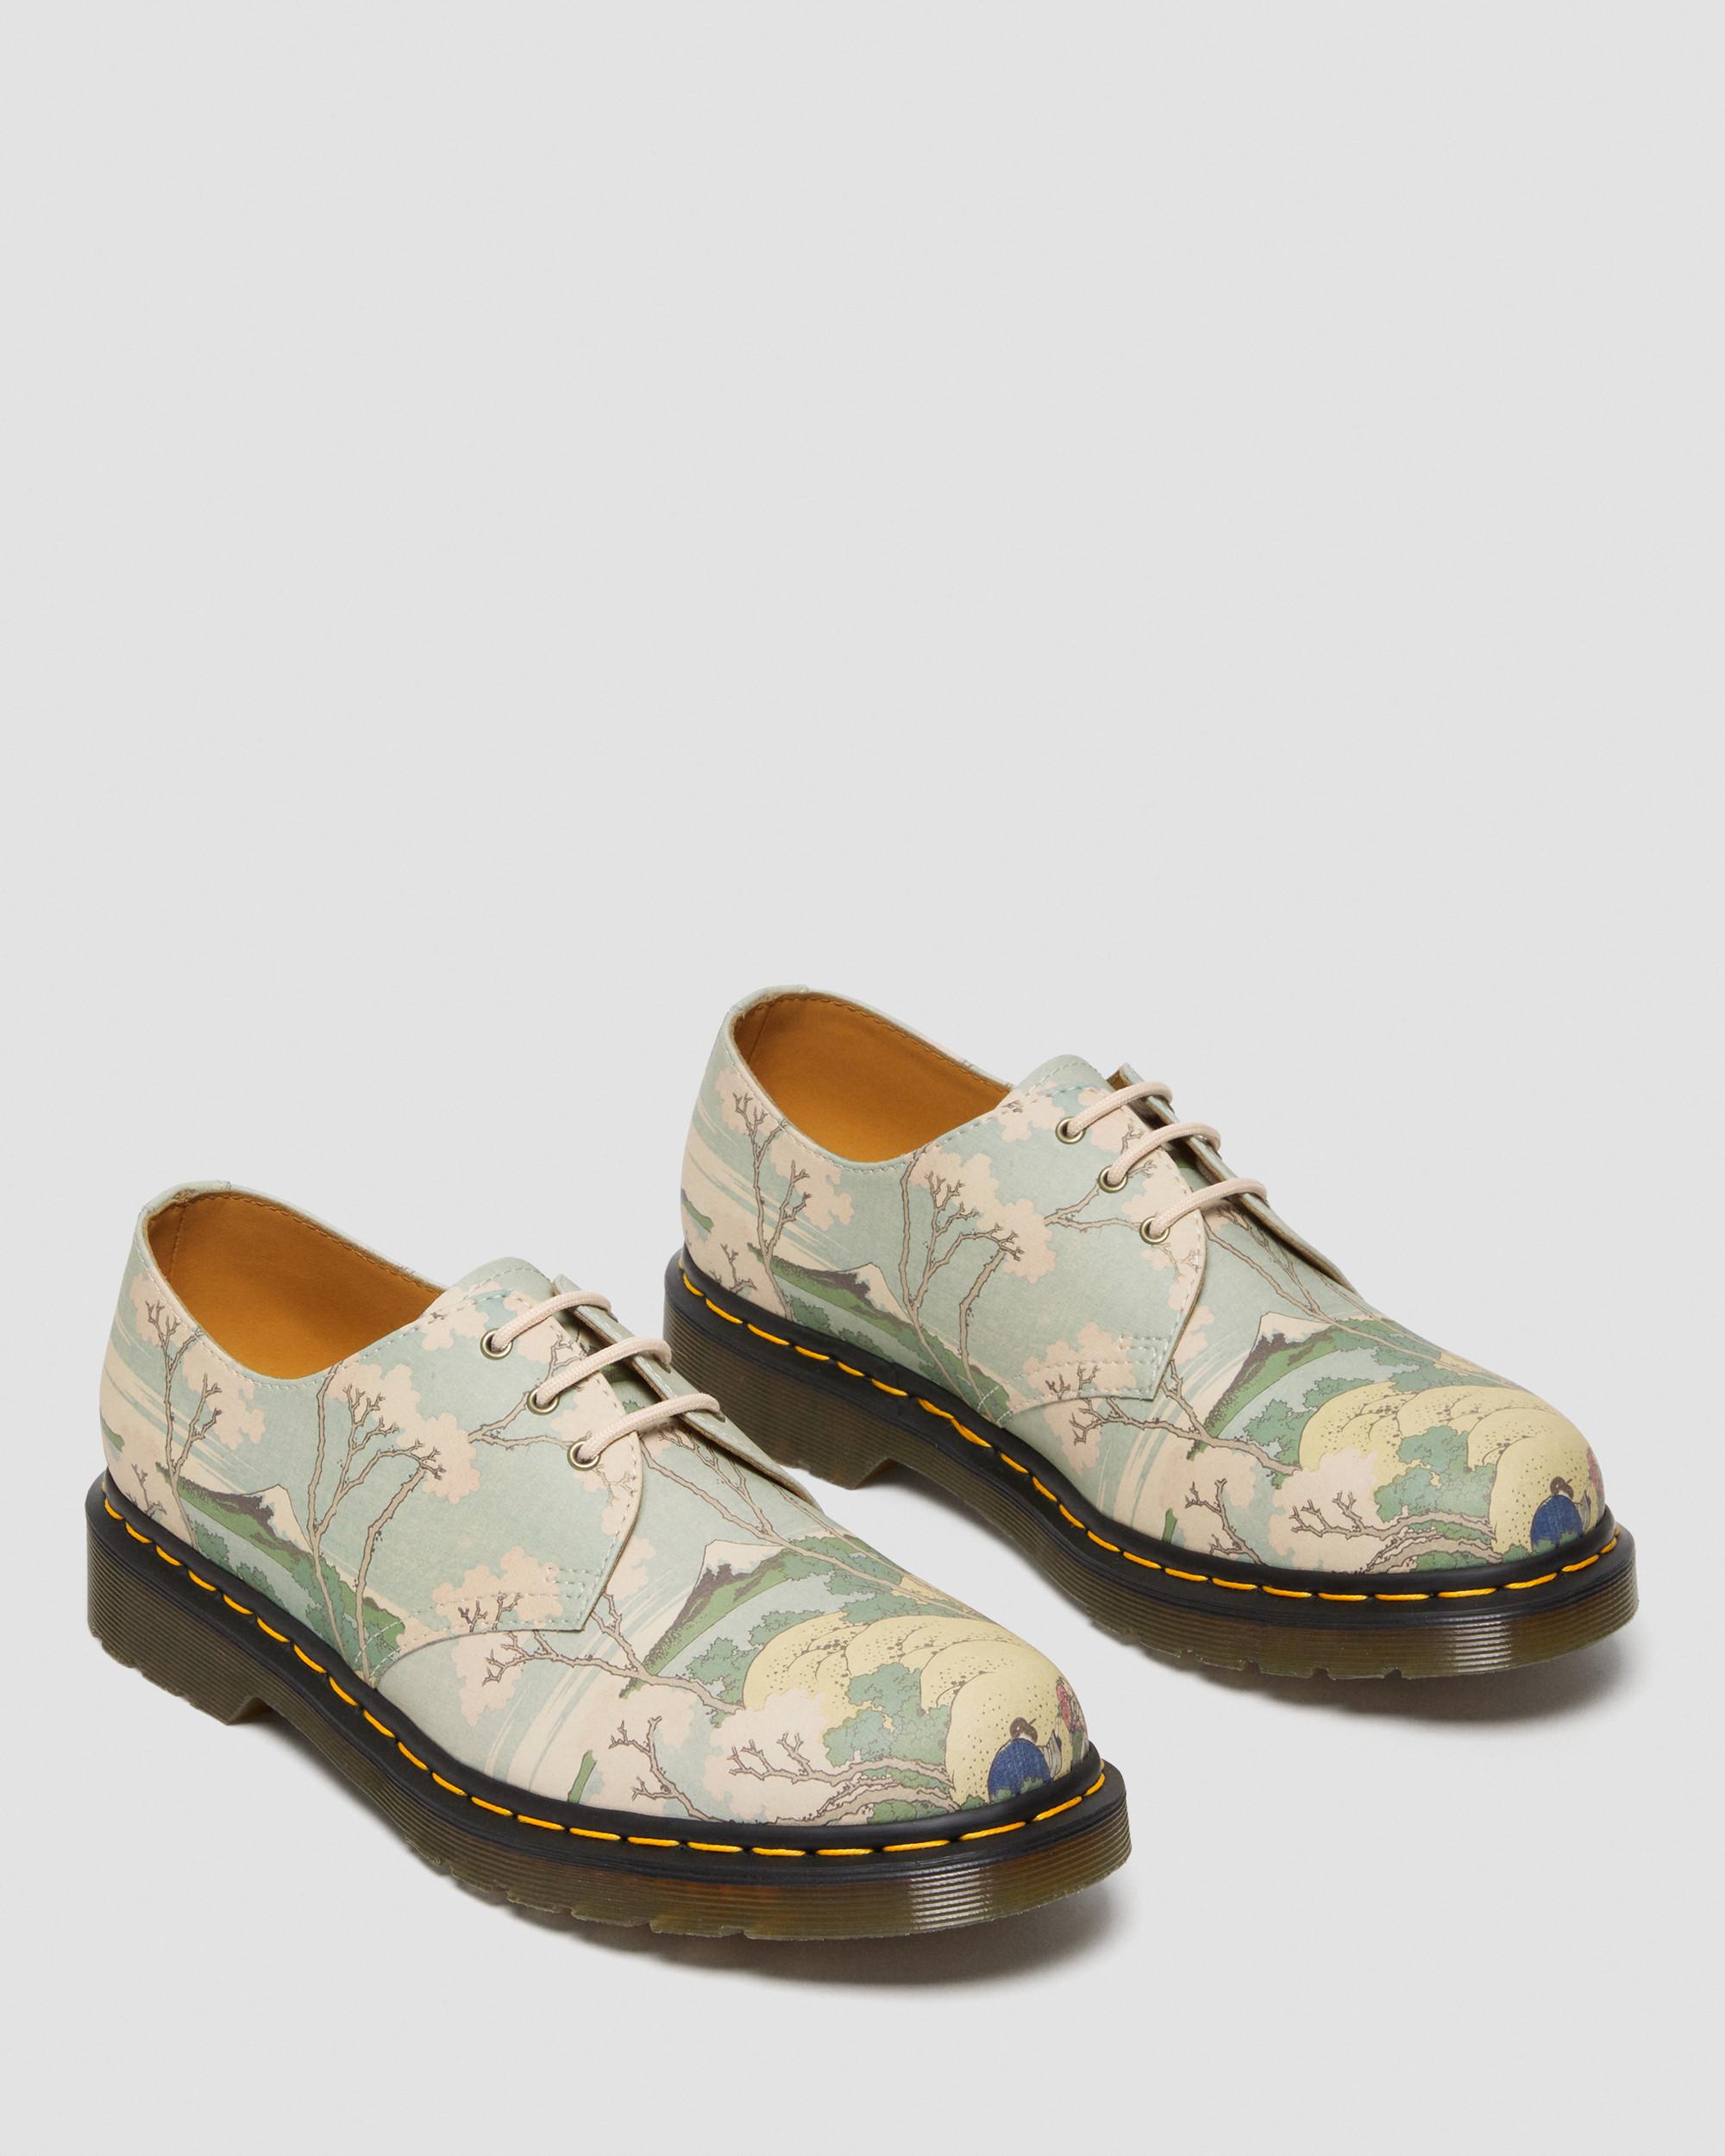 The Met 1461 Fuji Leather ShoesThe Met 1461 Fuji Leather Shoes Dr. Martens